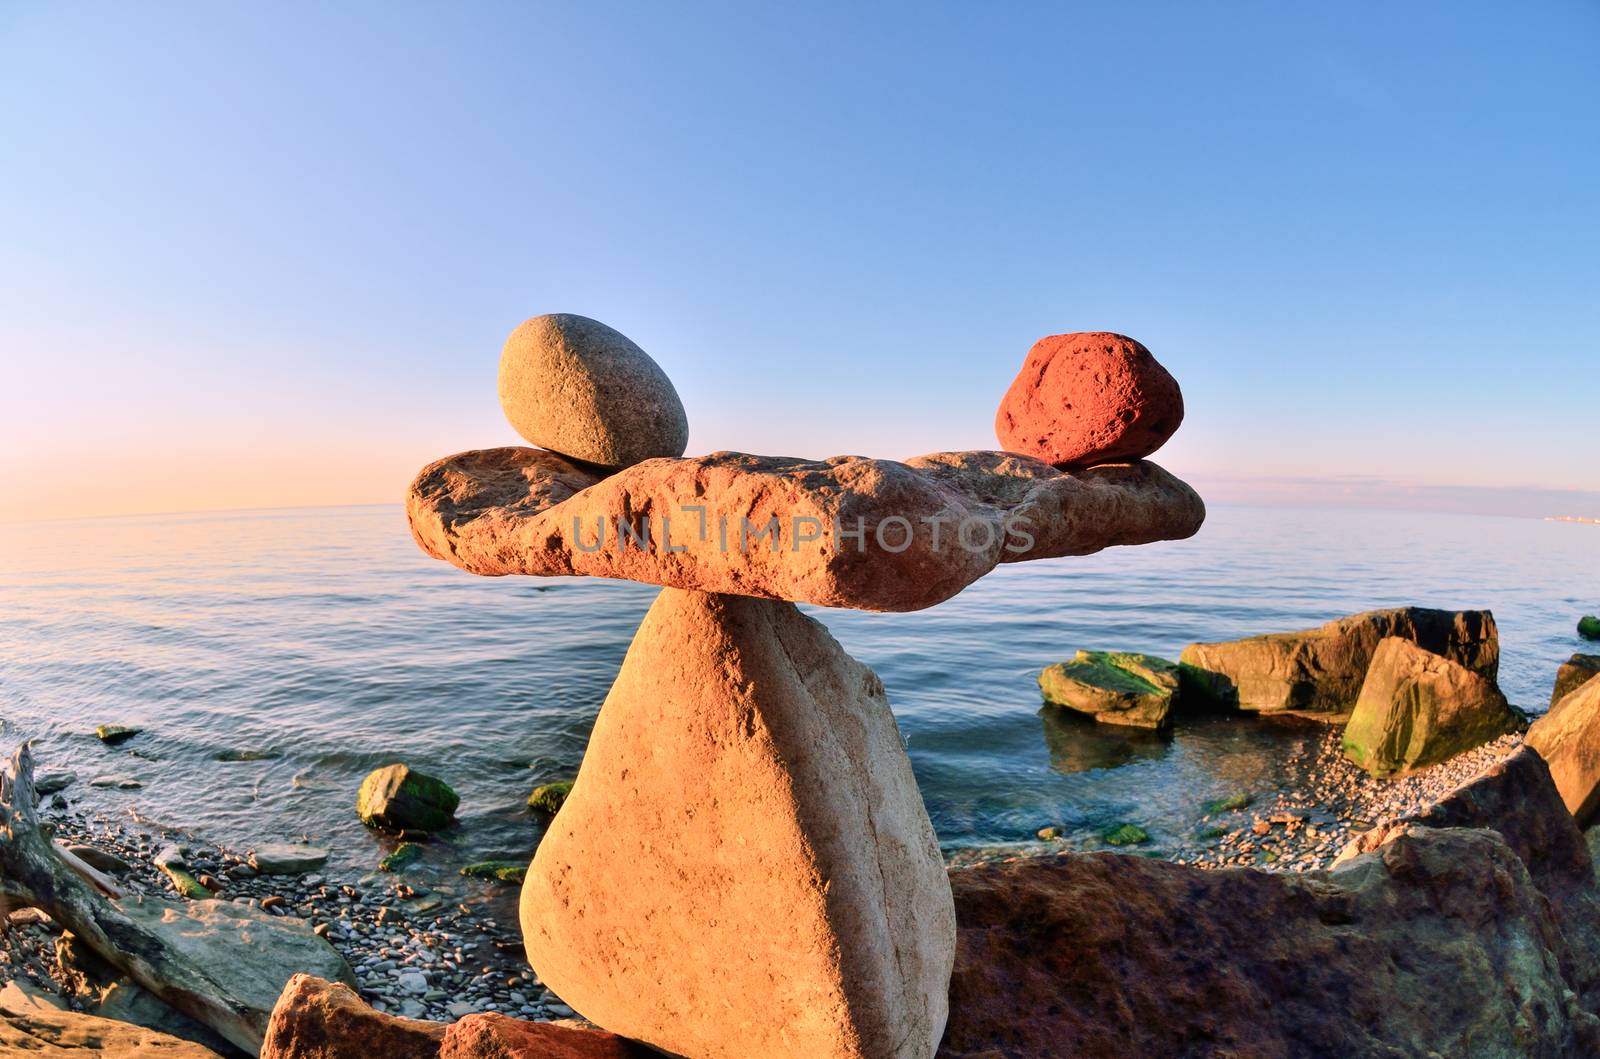 Symbol of scales is made of pebbles on the stony seashore